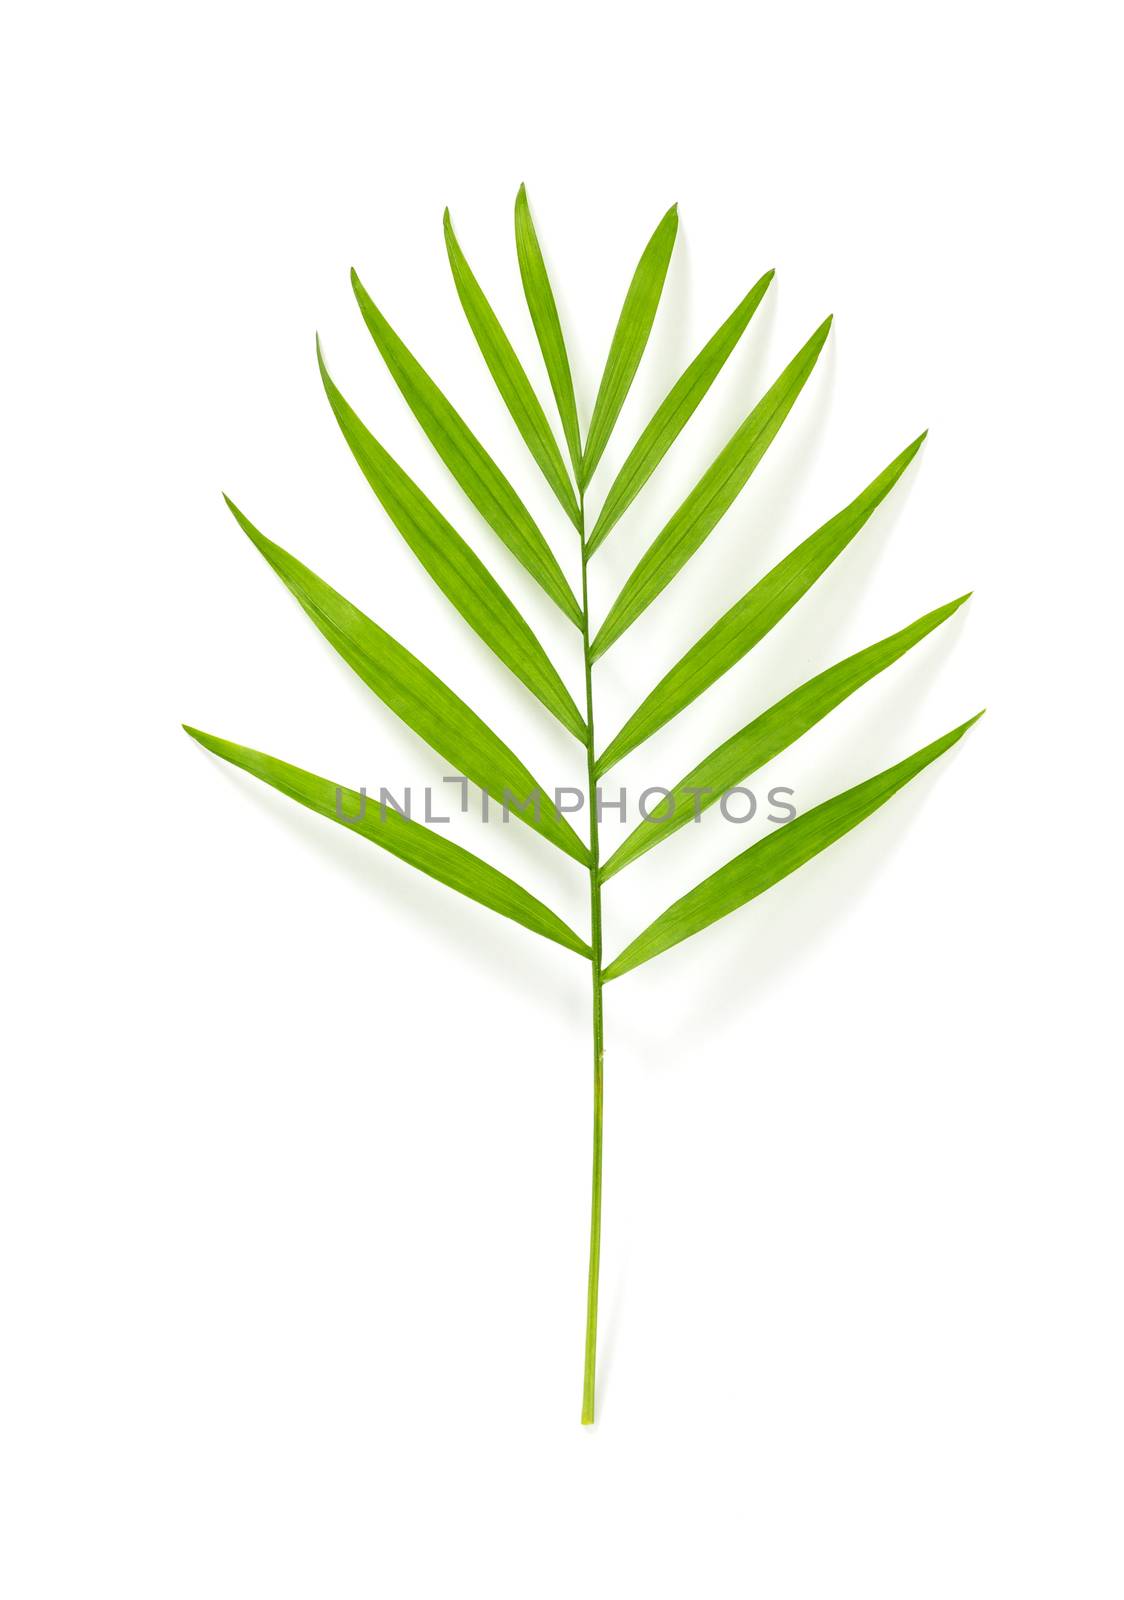 Green parlor palm tree leaf, isolated on white background.